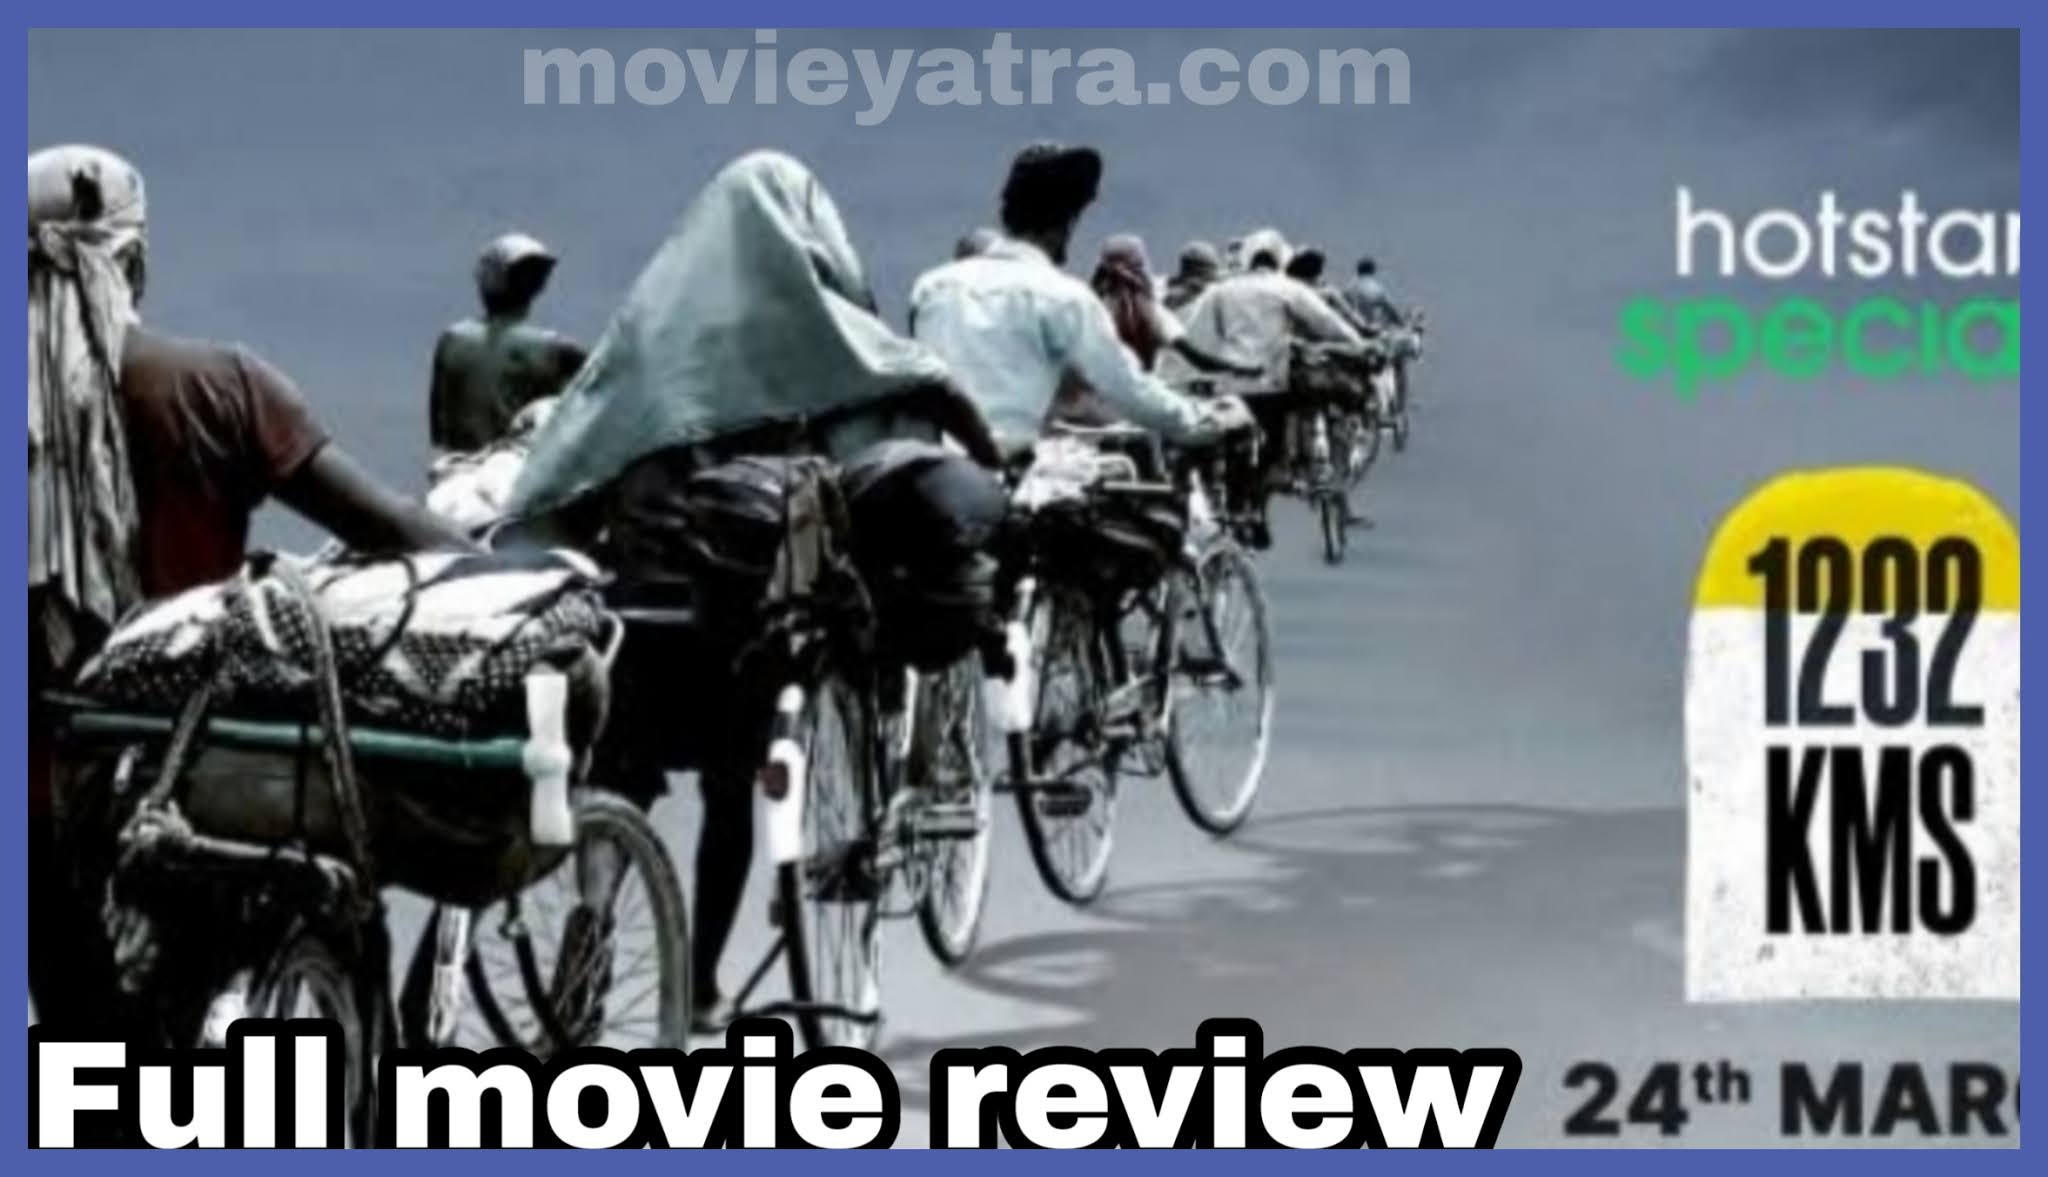 1232 KMS Download full HD Quality 1080p, 720p, 680p, 480p, | 1232 KMS Review in Hindi language ,